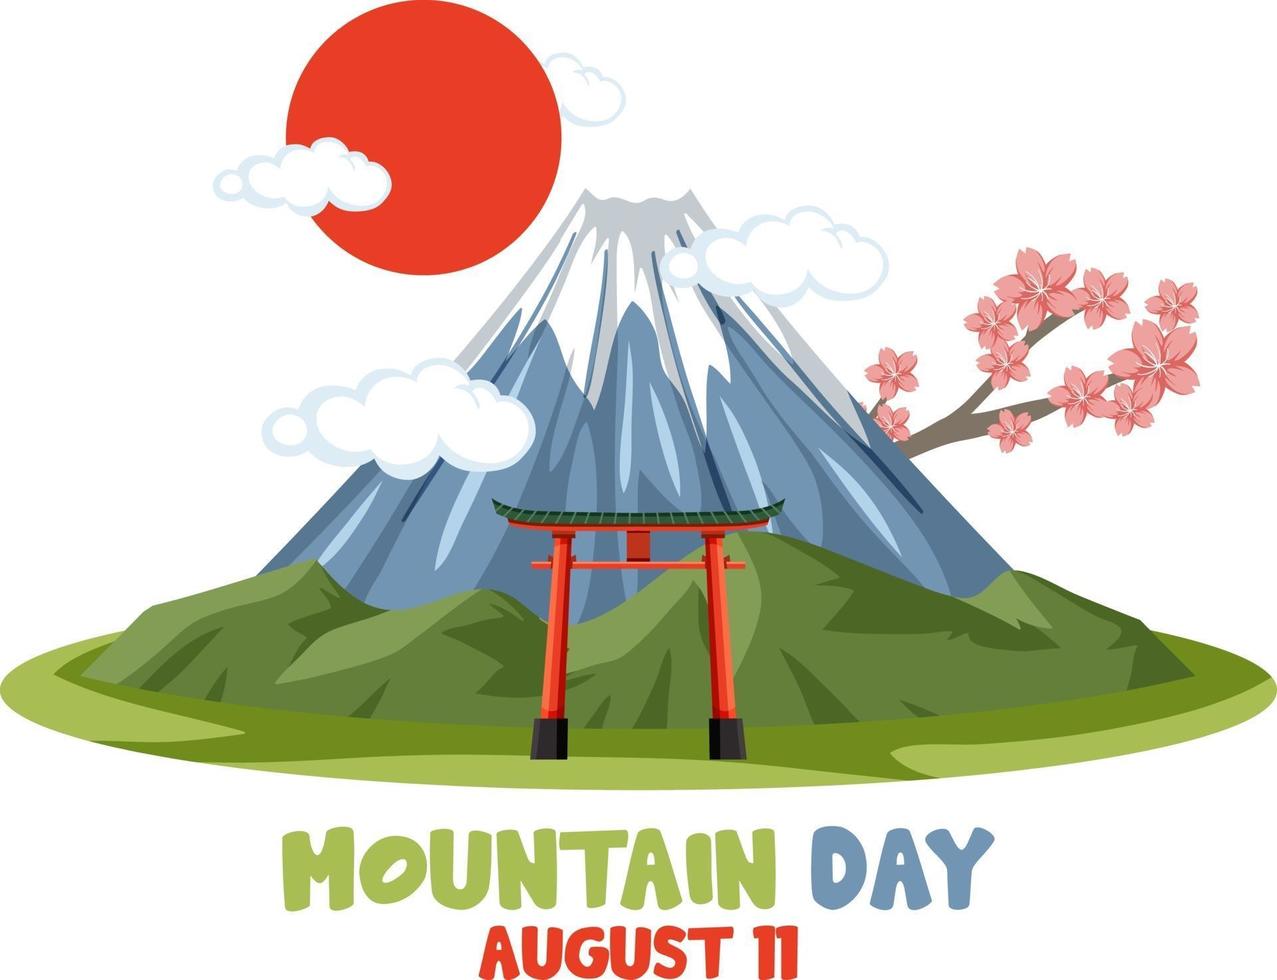 Mount Fuji with Mountain Day on August 11 font banner vector